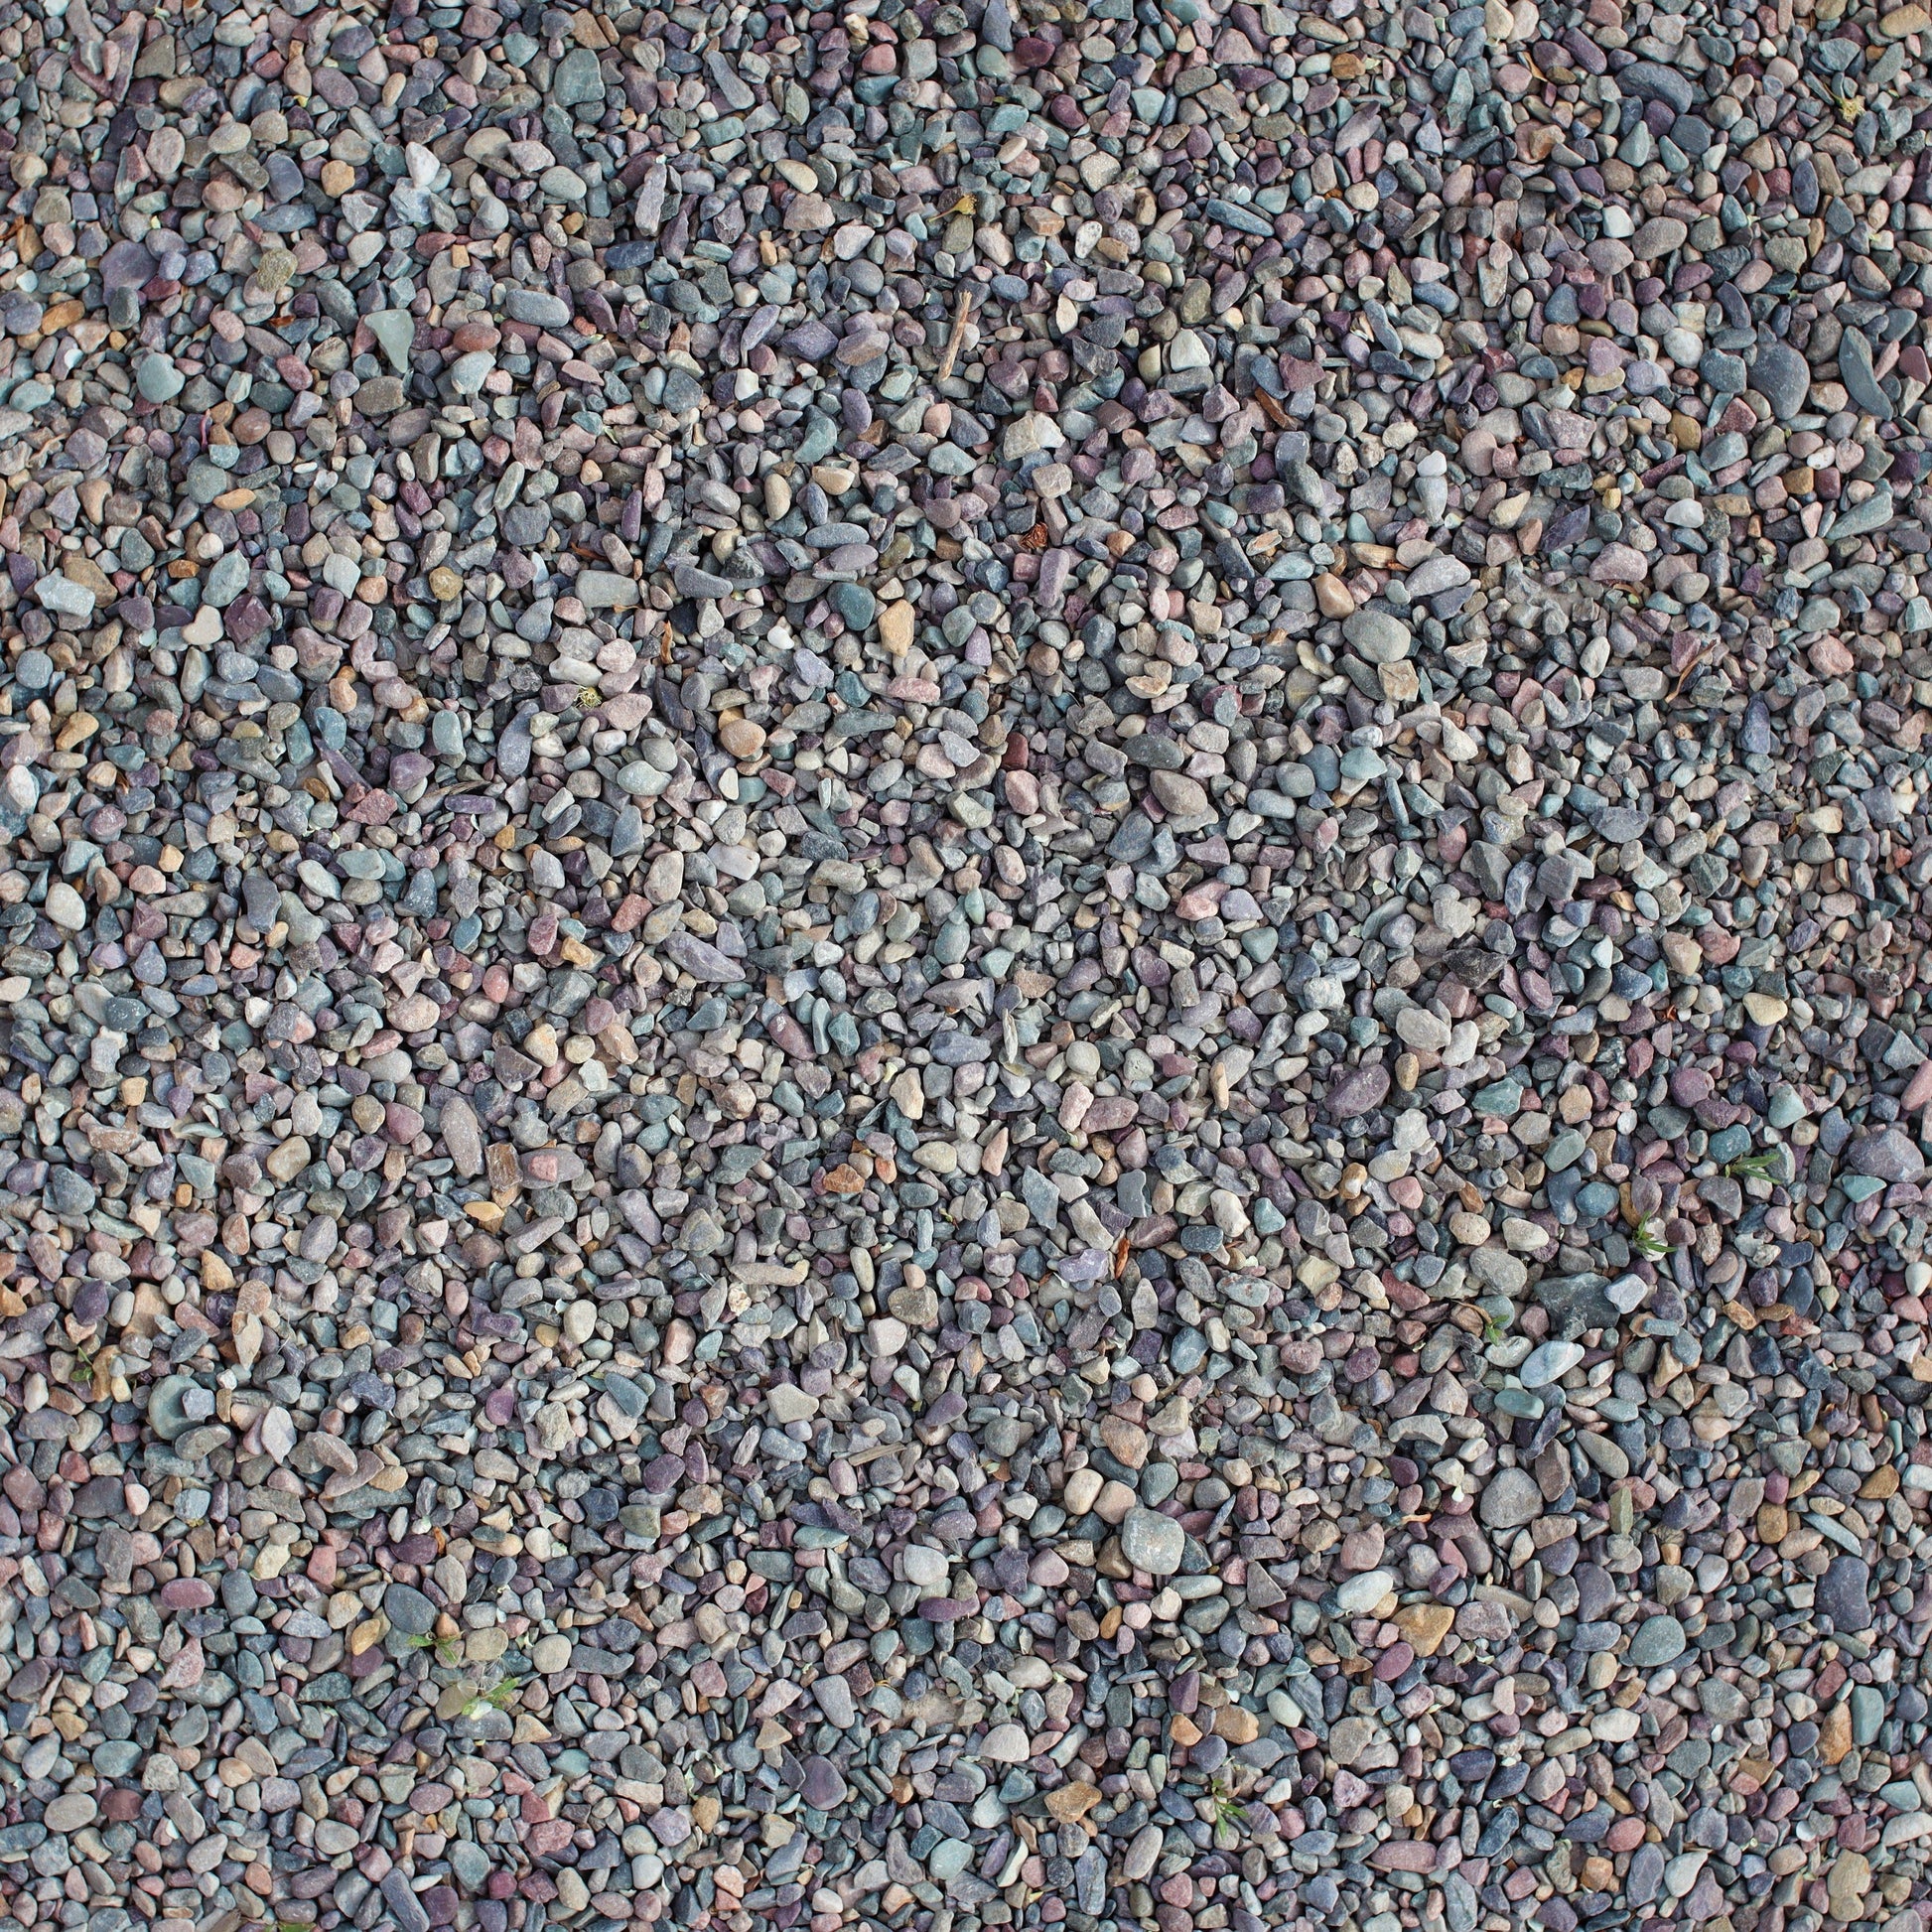 Overhead View of Pea Gravel, a landscape material available for delivery from Missoula Dirt Delivery